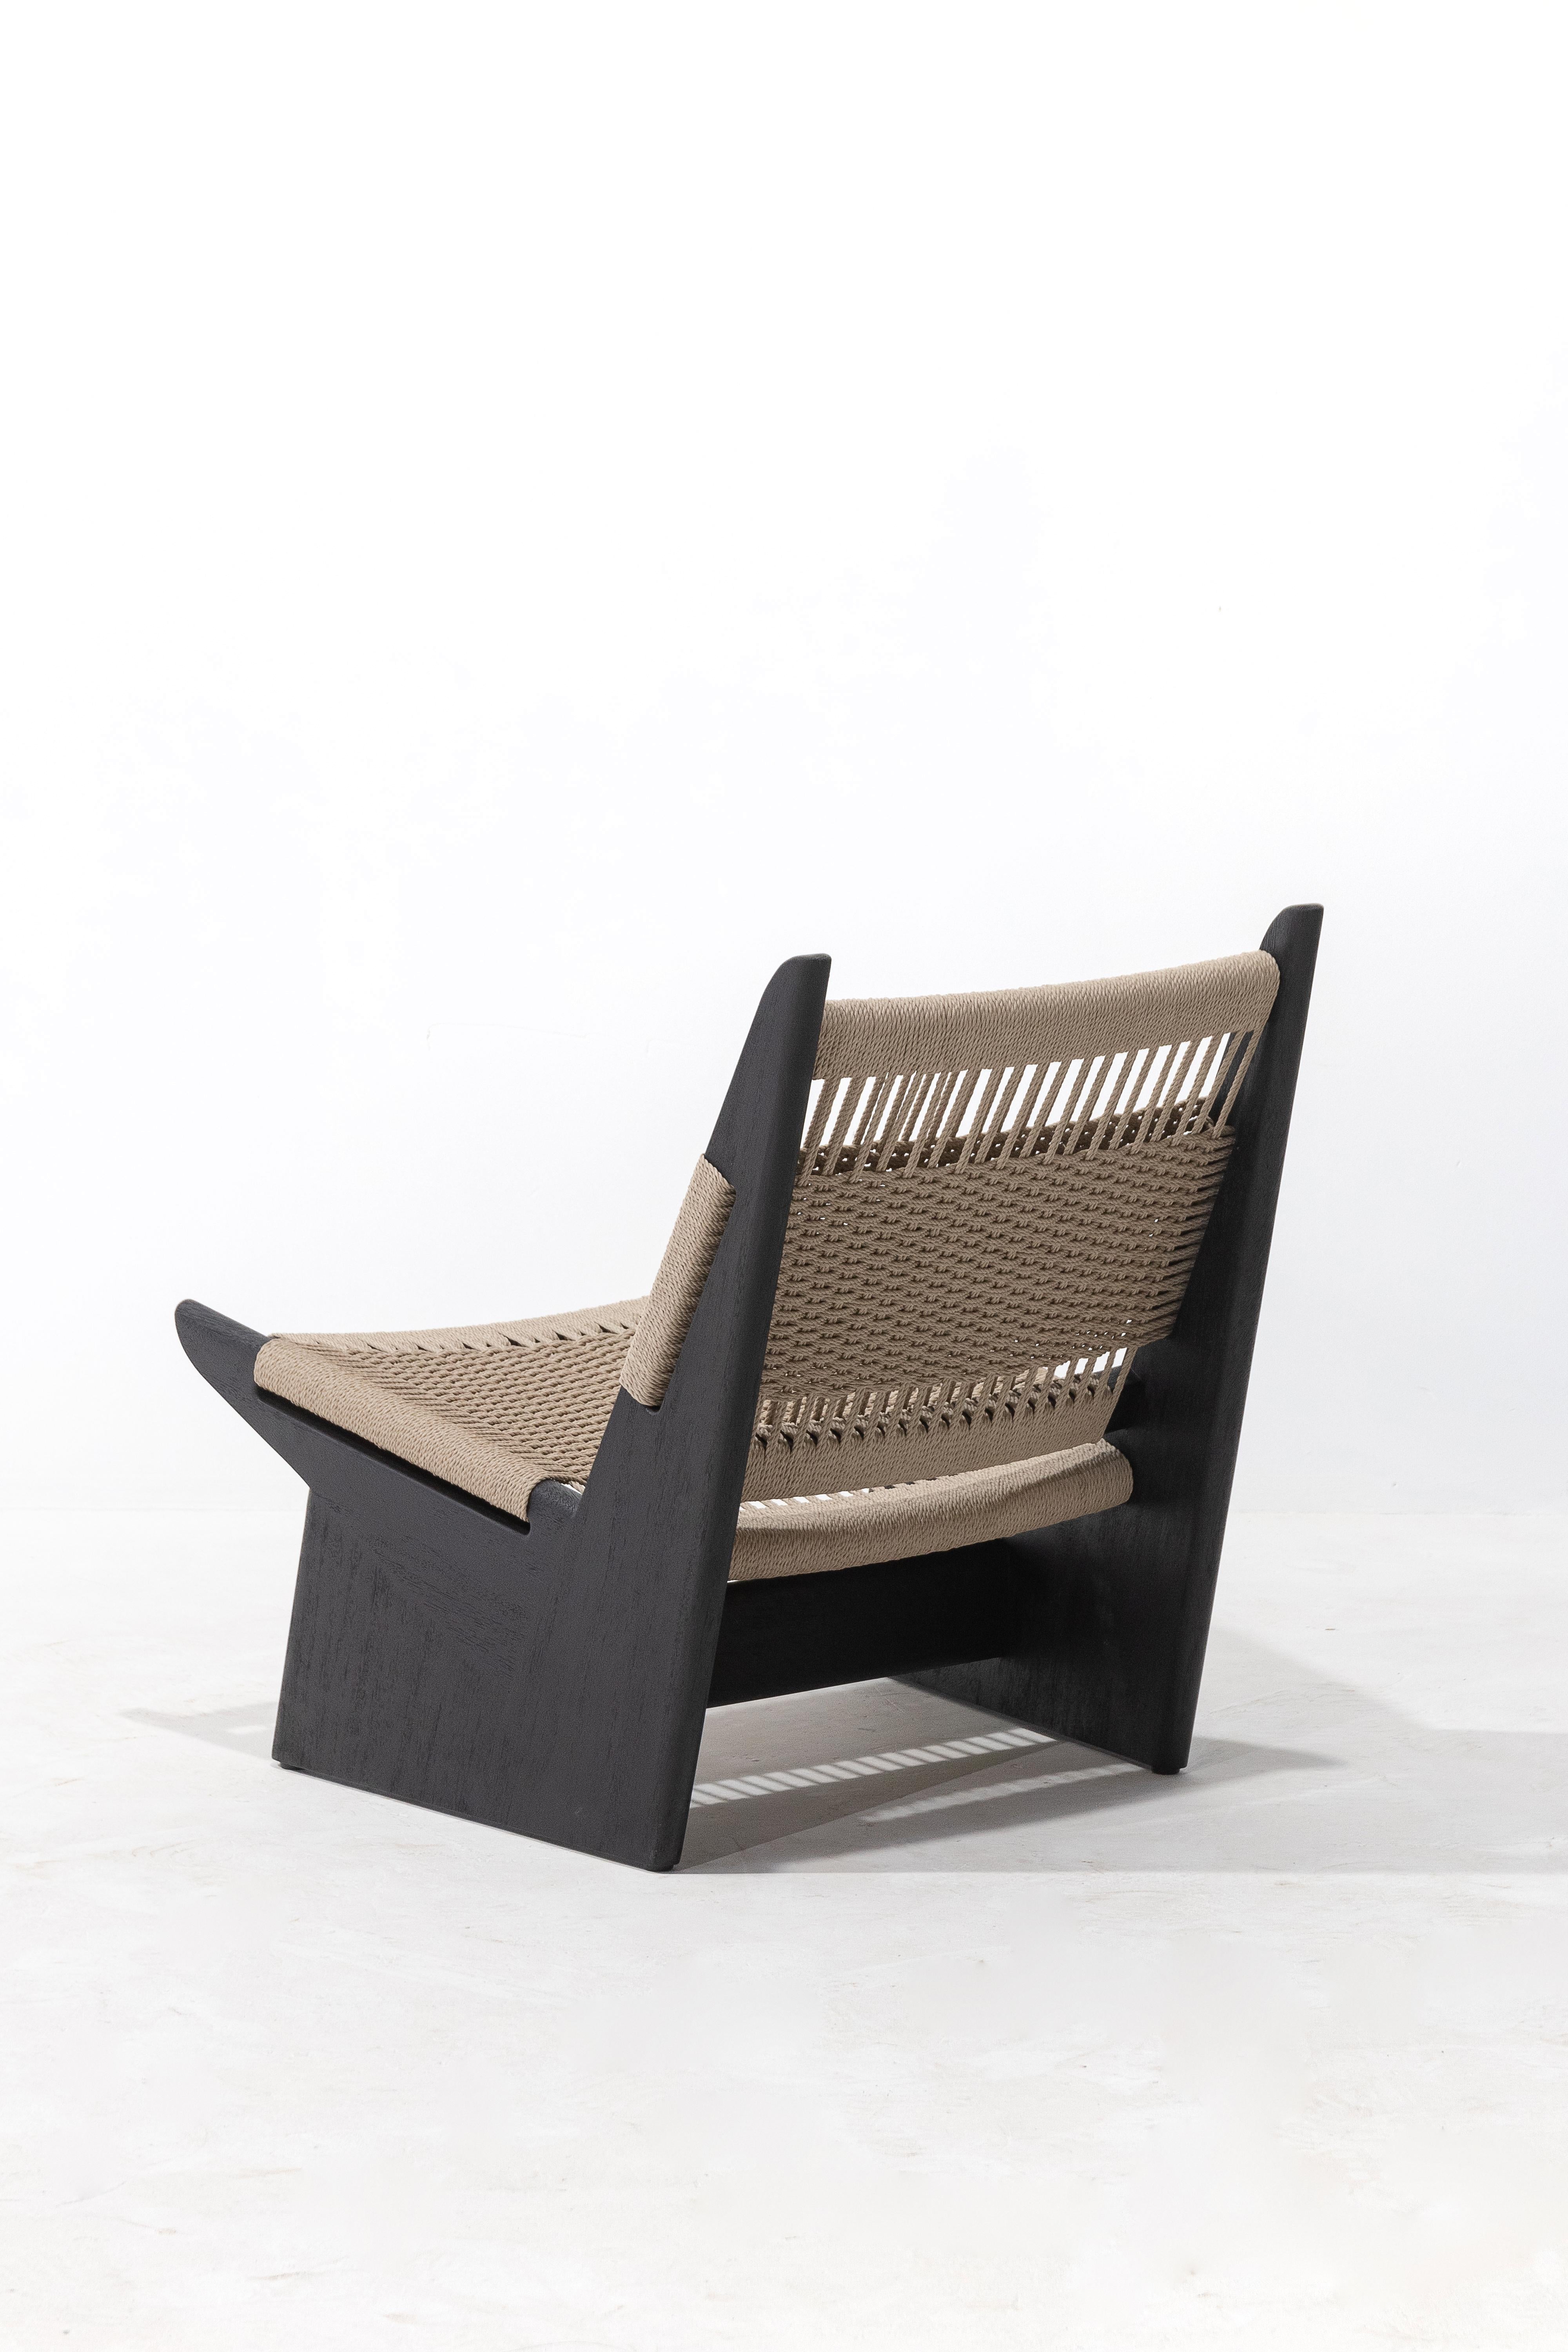 Hand-Crafted KENA lounge, Rough Black Acacia Wood For Sale